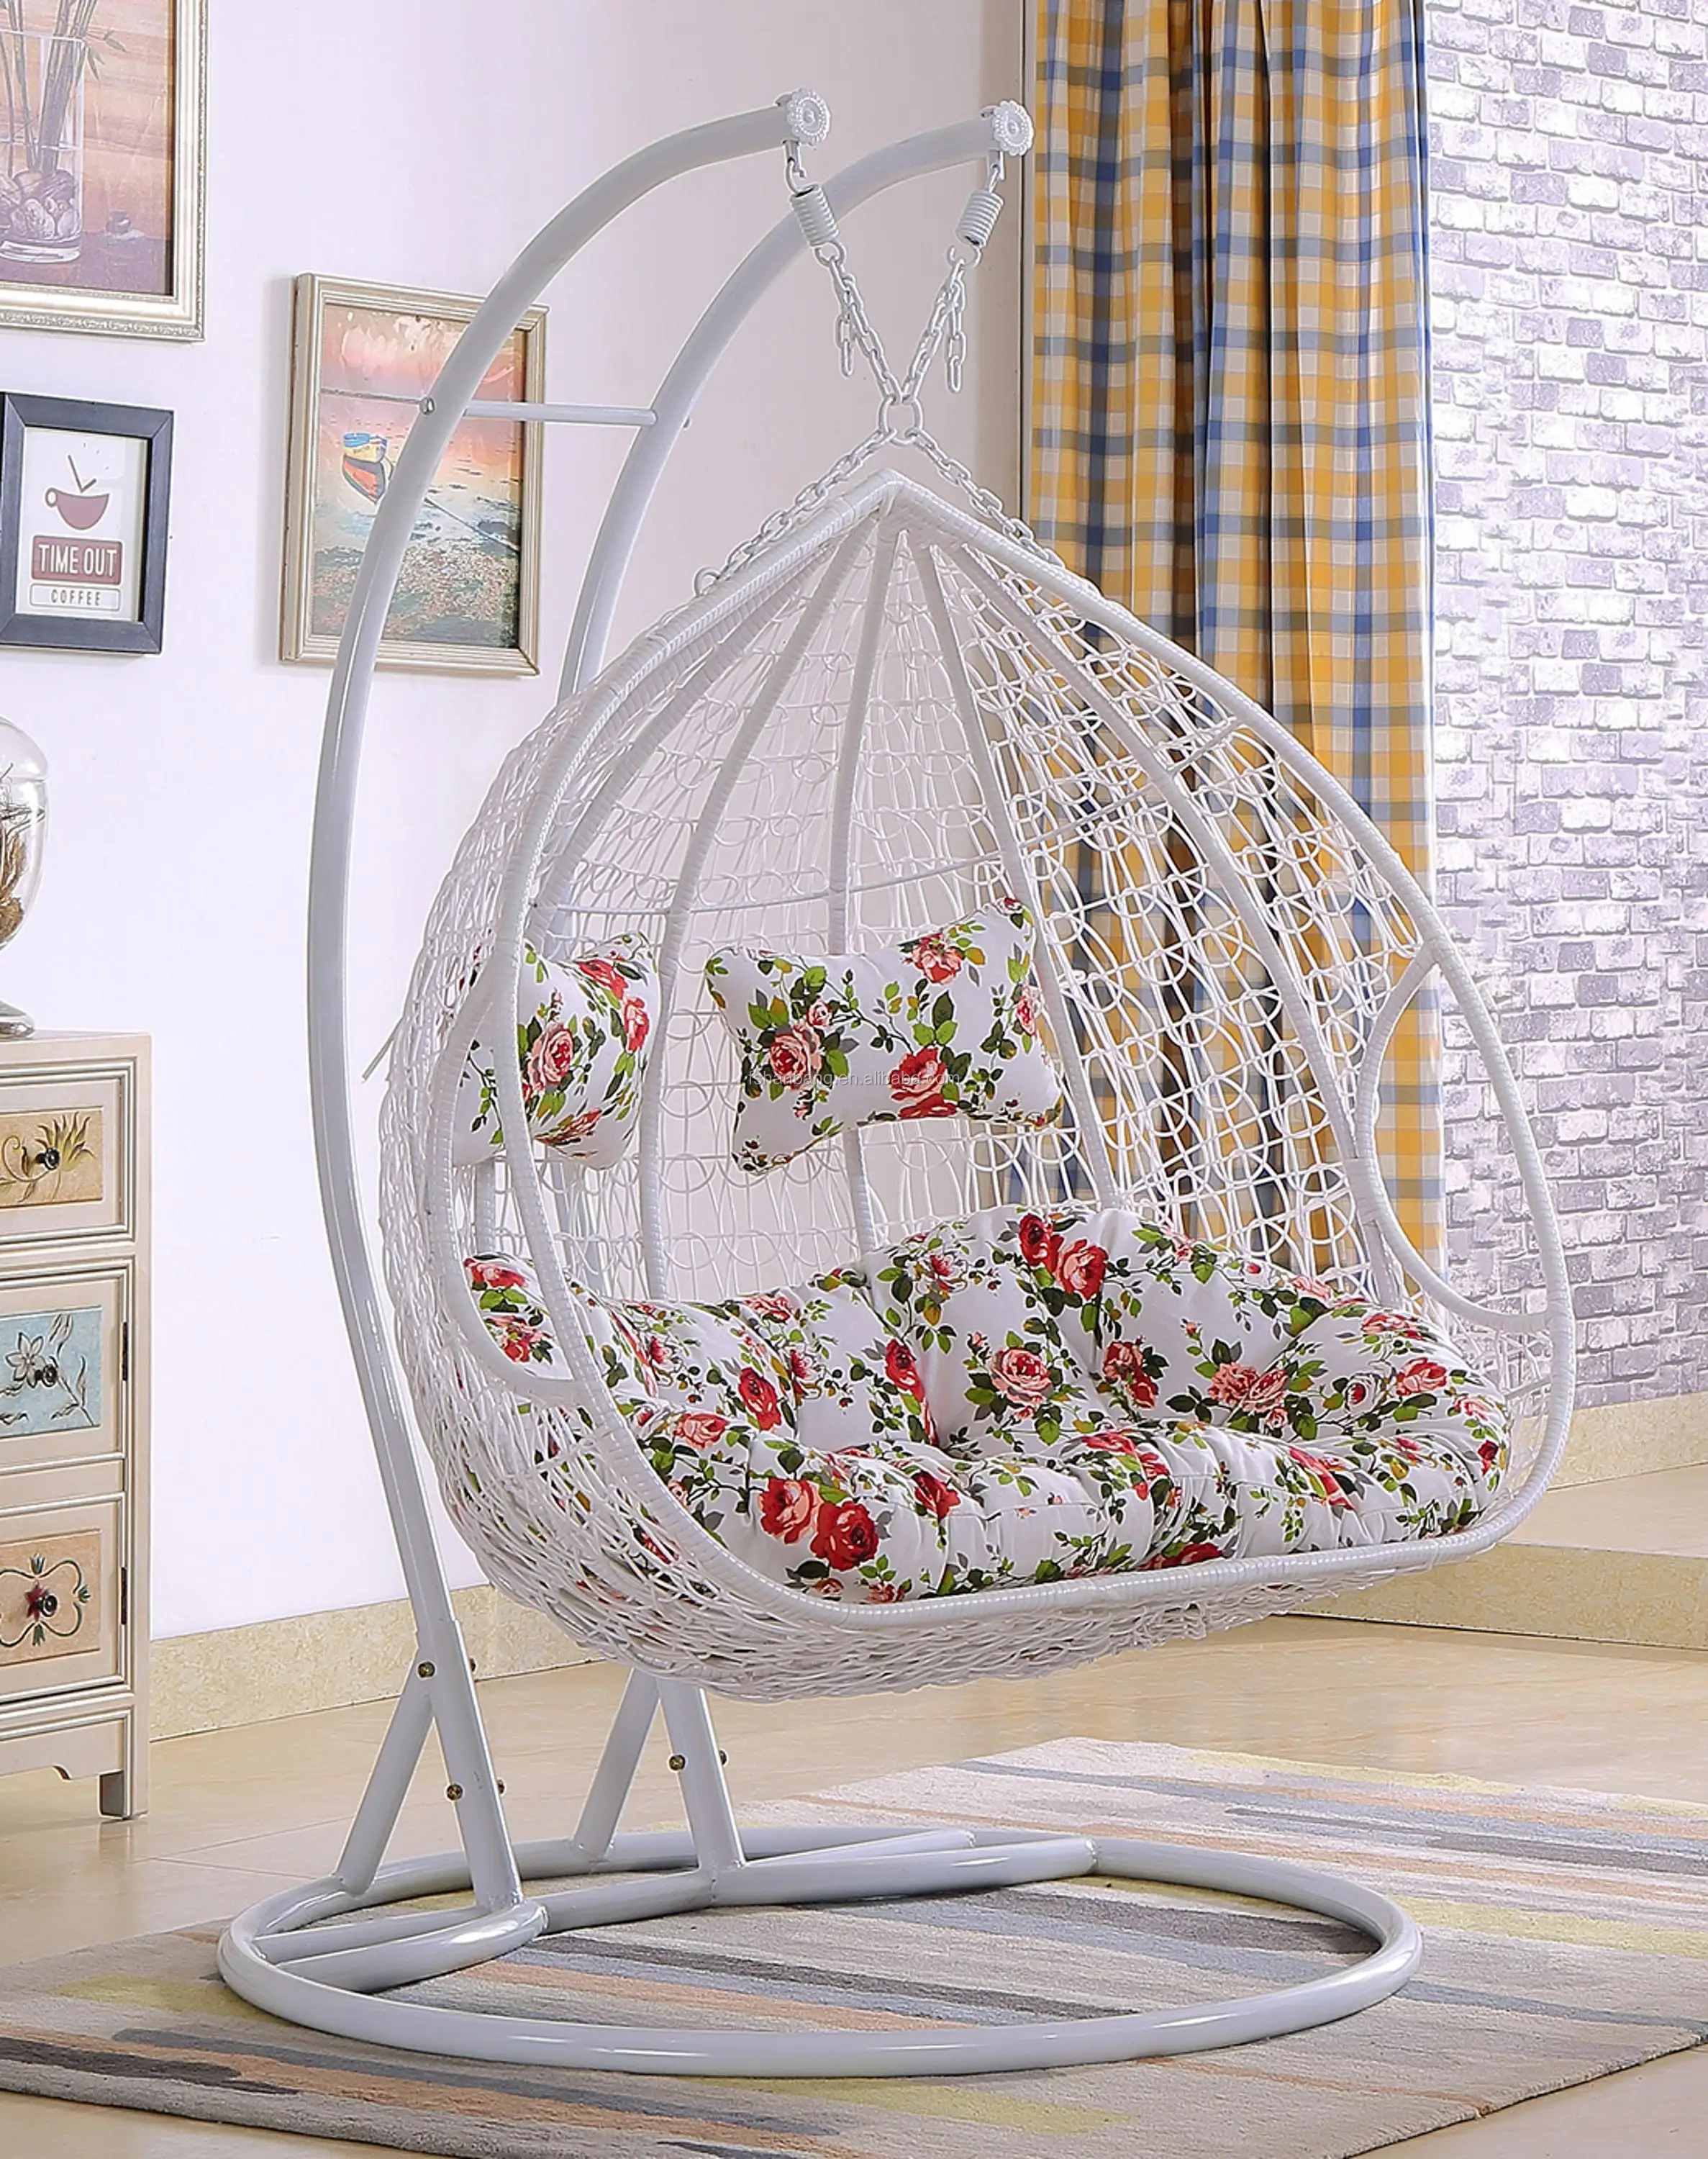 luxury outdoor 2 person garden patio swing hanging chair view hanging chair love rattan product details from foshan hanbang furniture co ltd on